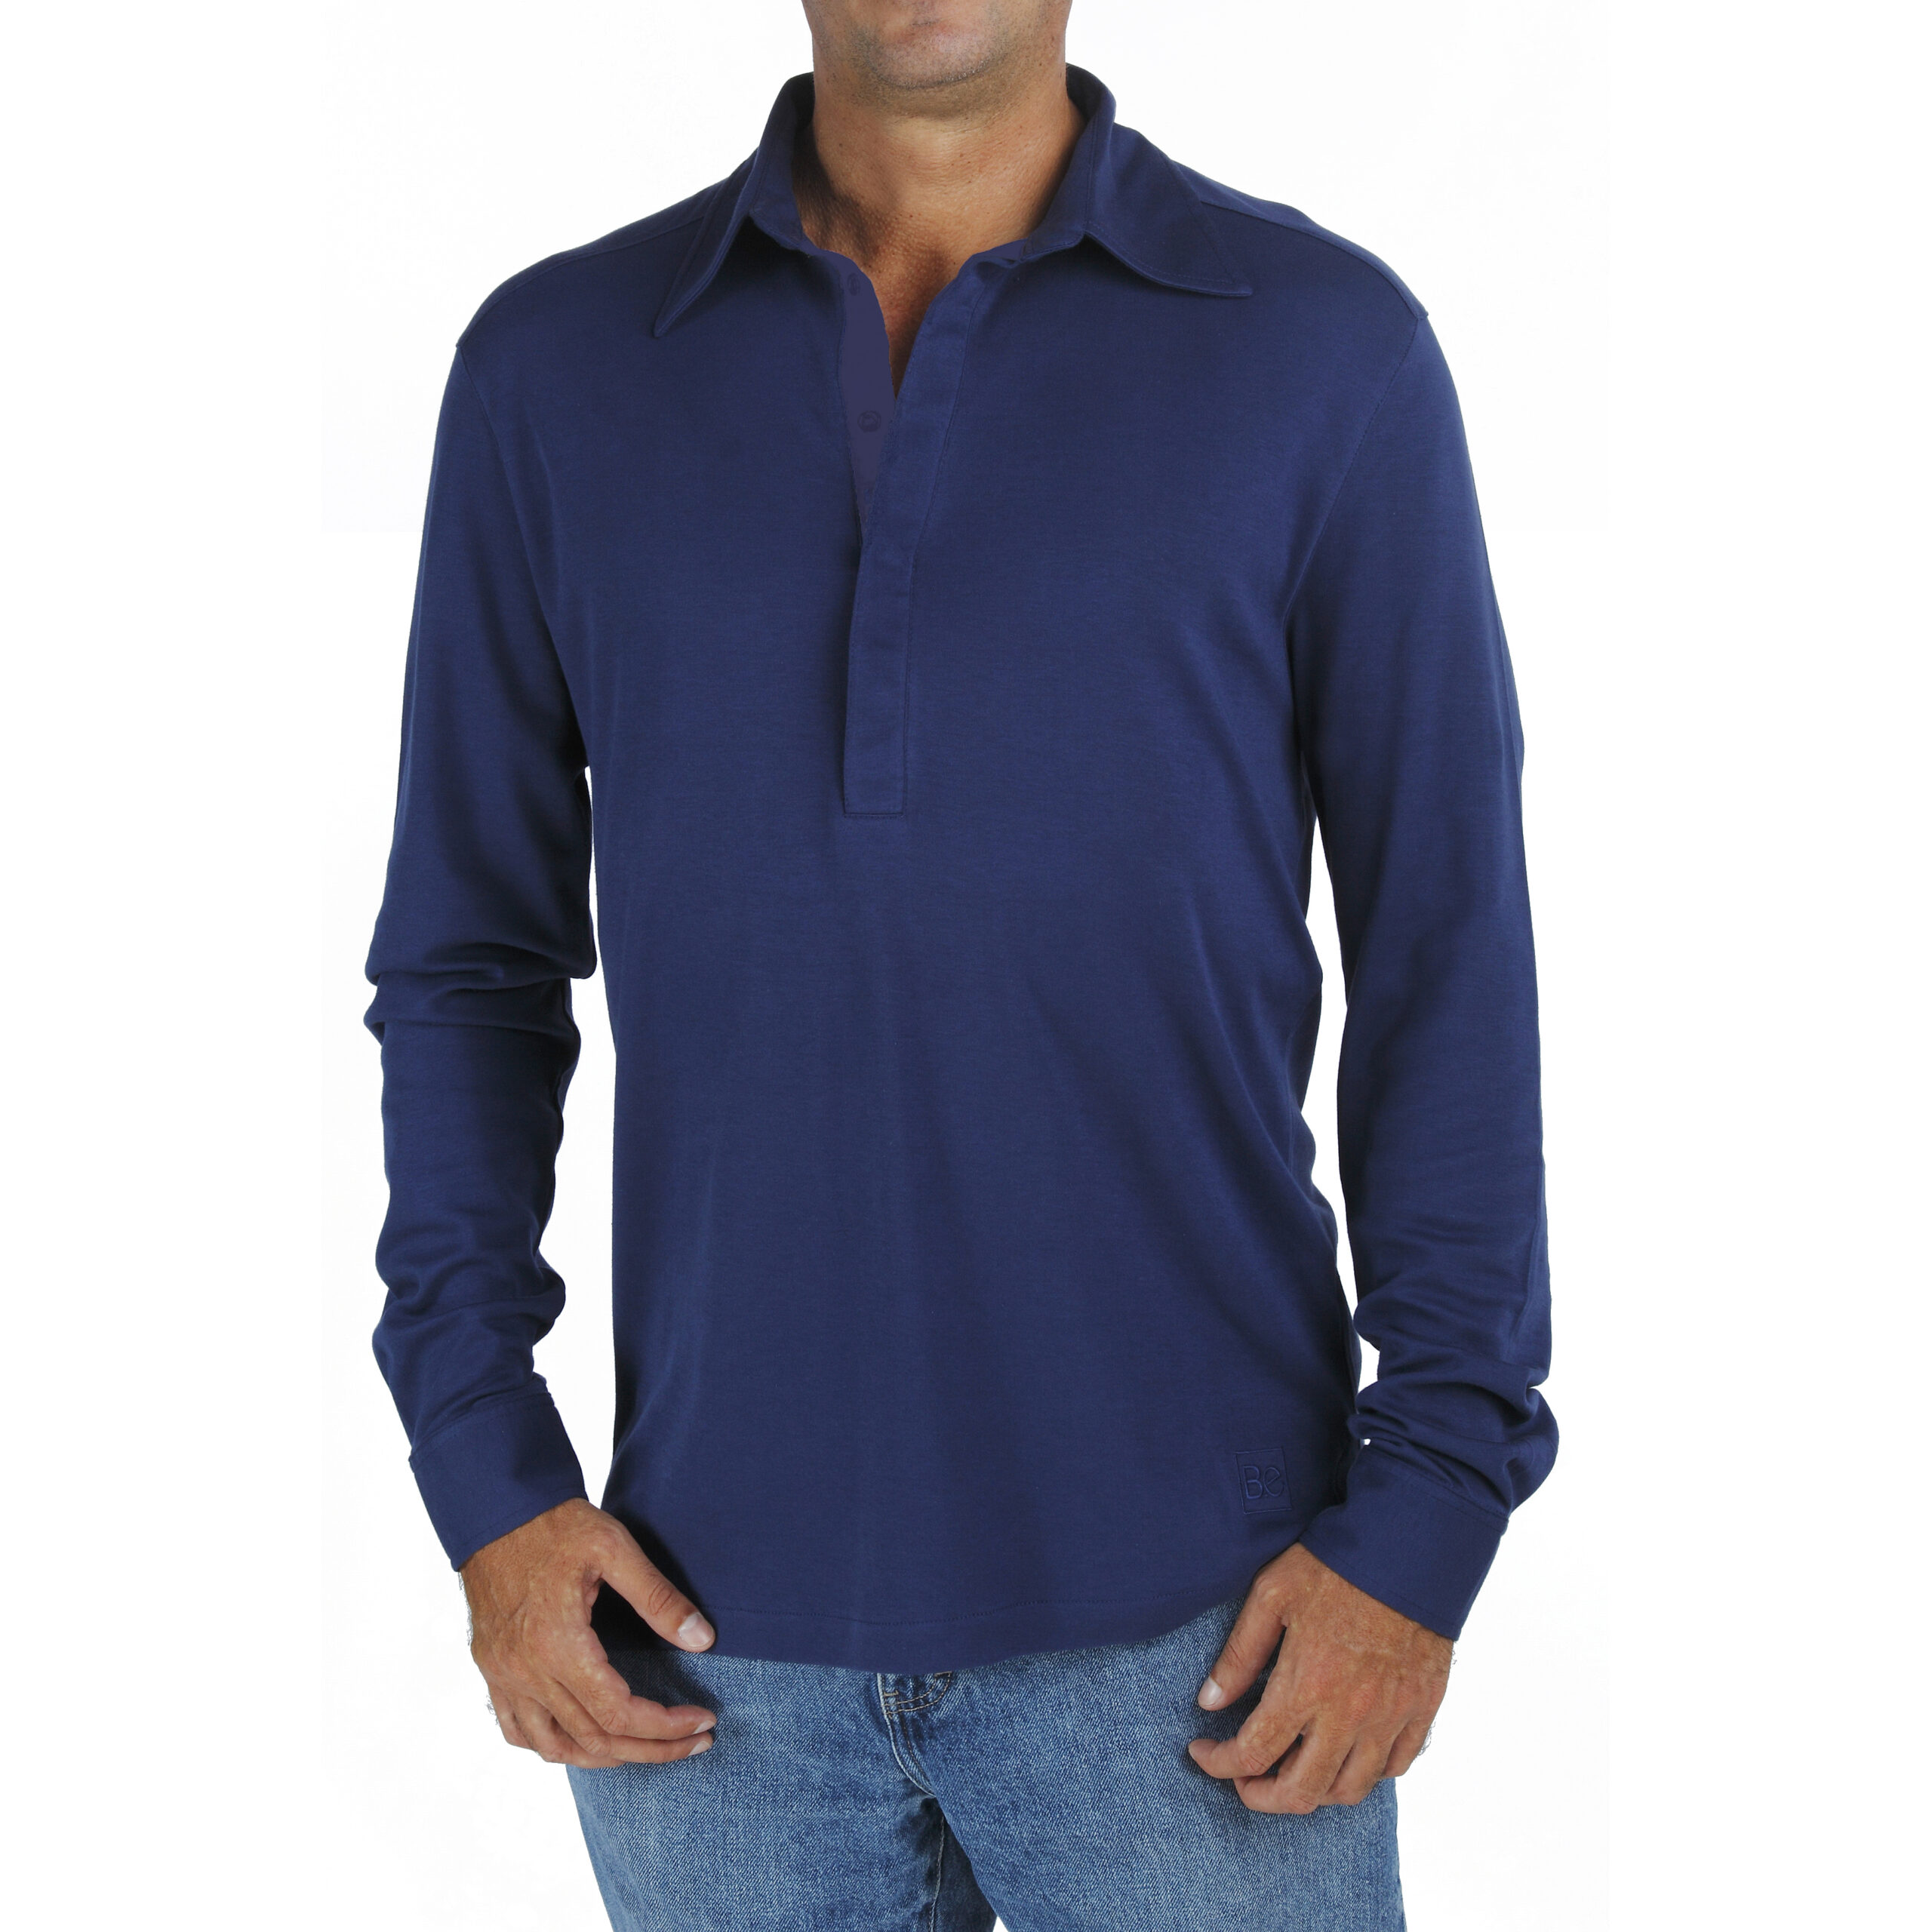 Elegant T-shirts and Polo shirts for Men